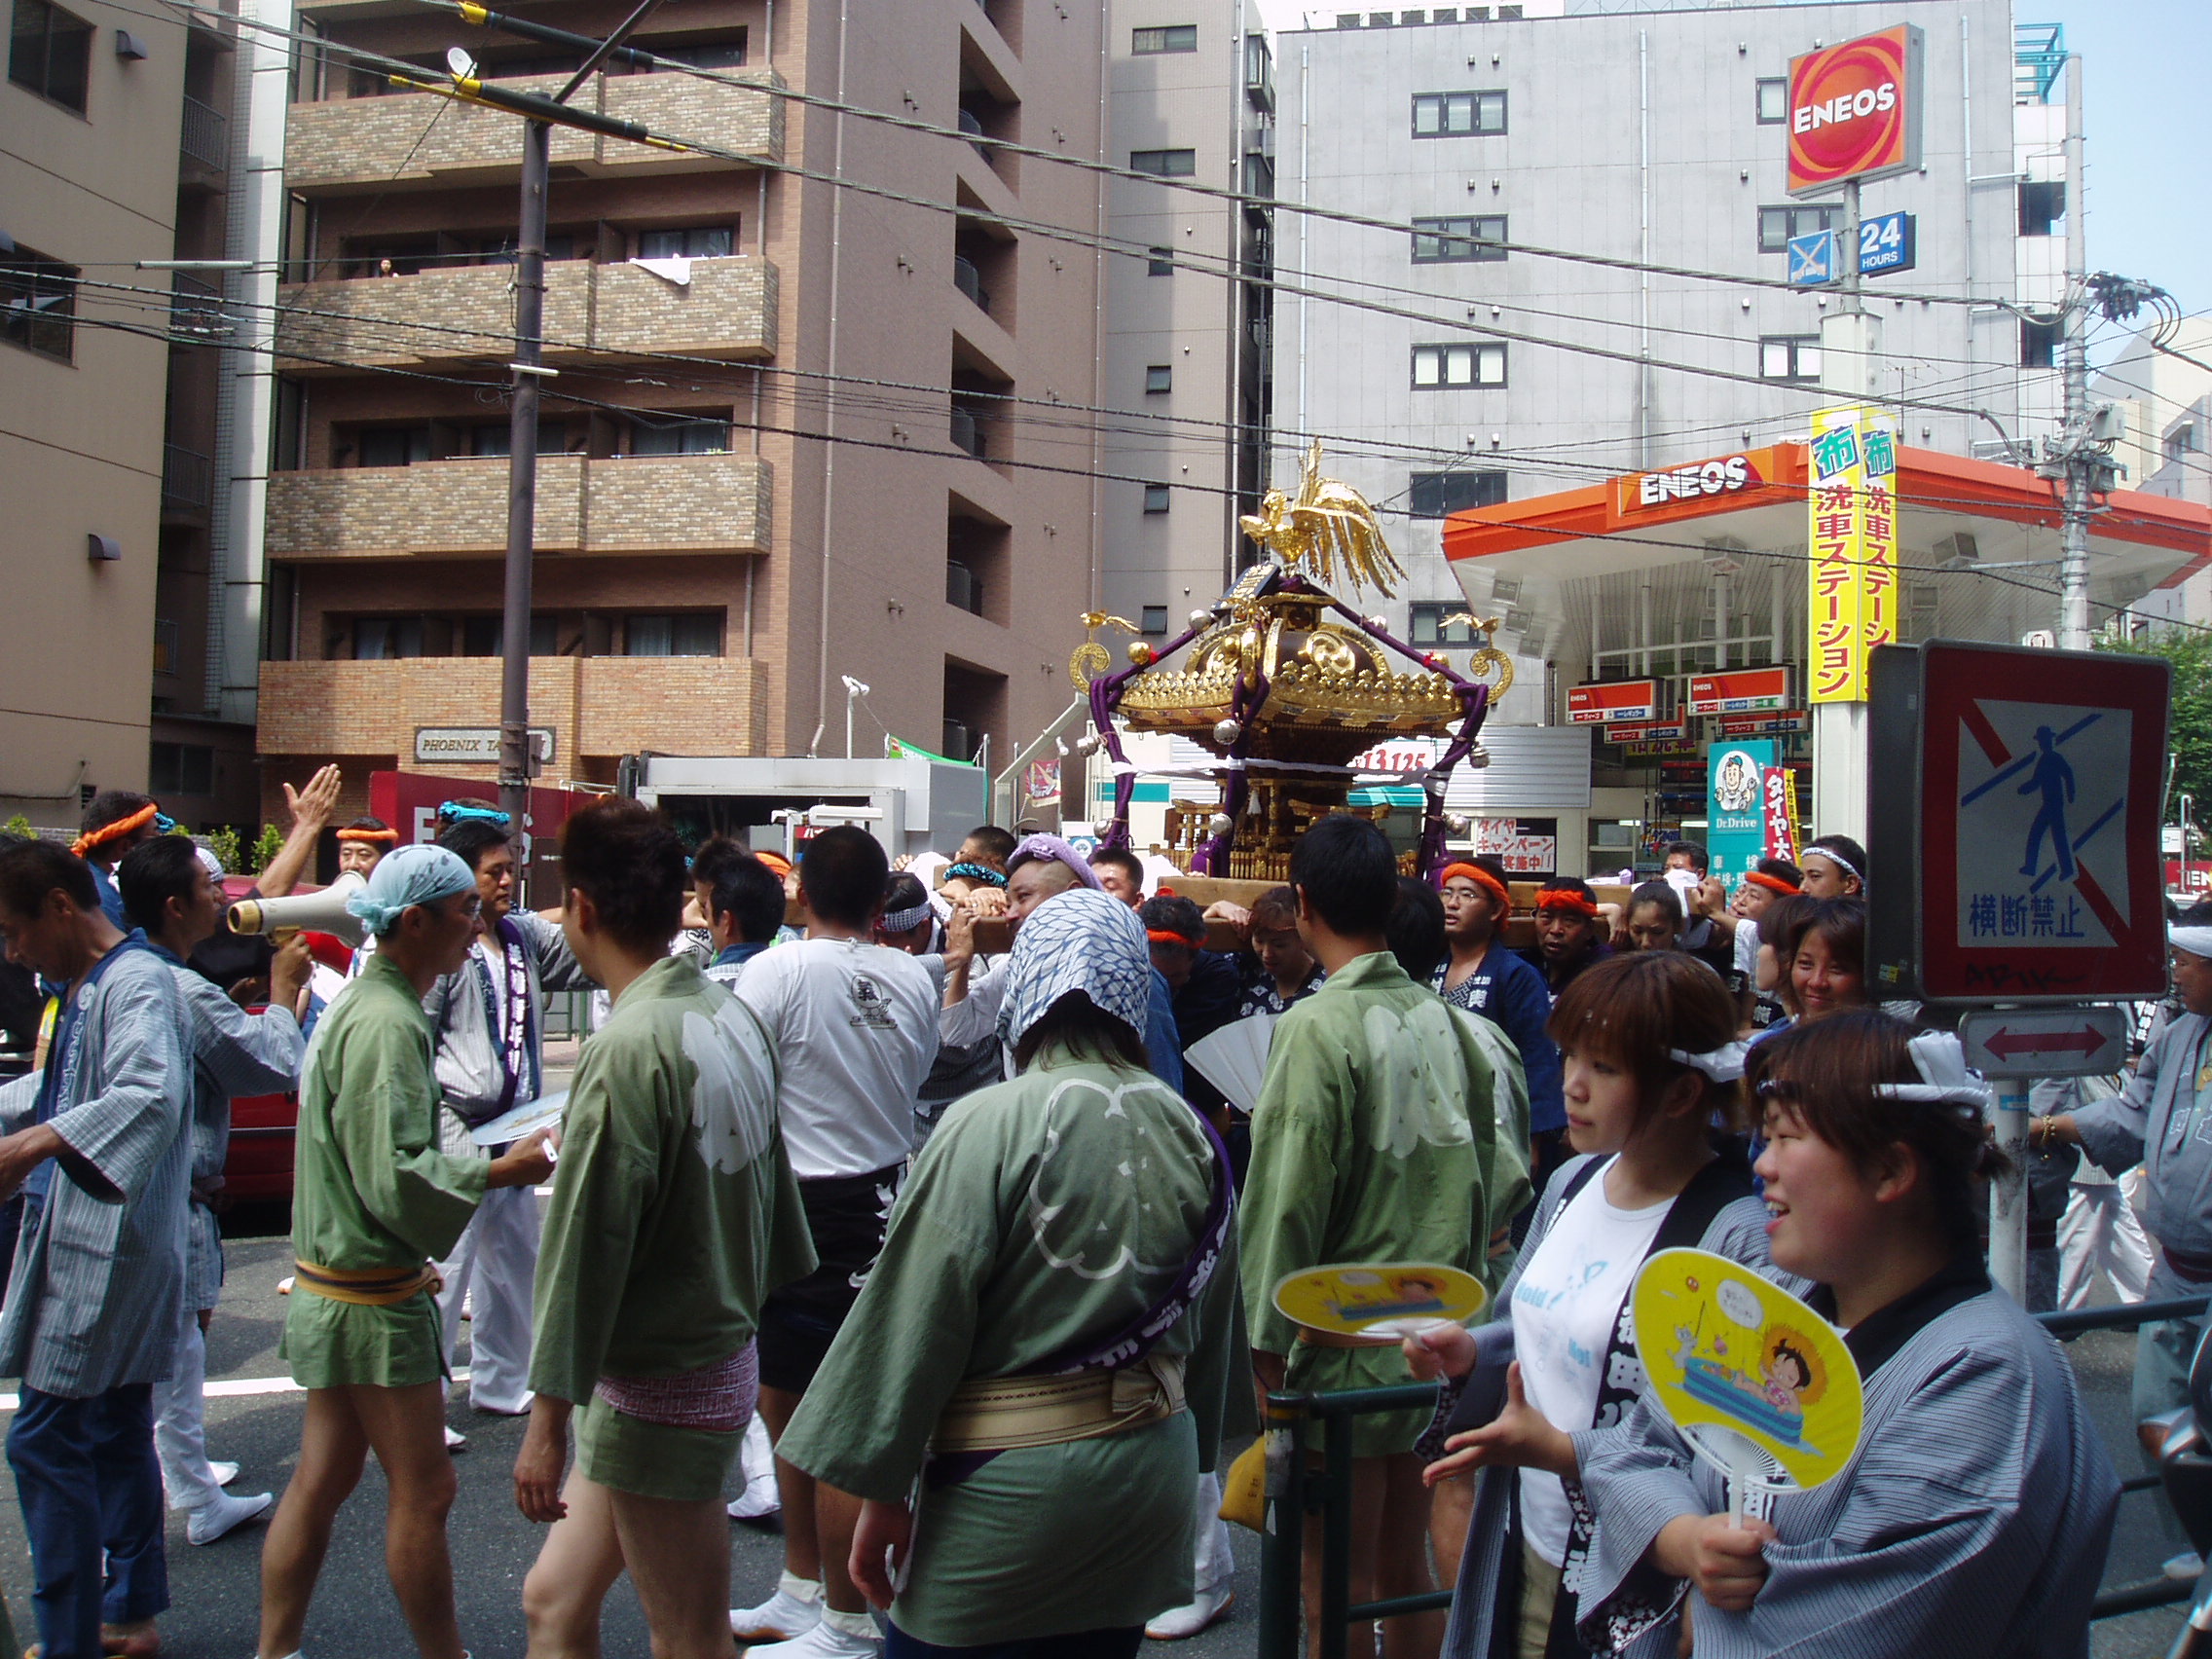 Crowd with small portable shrine